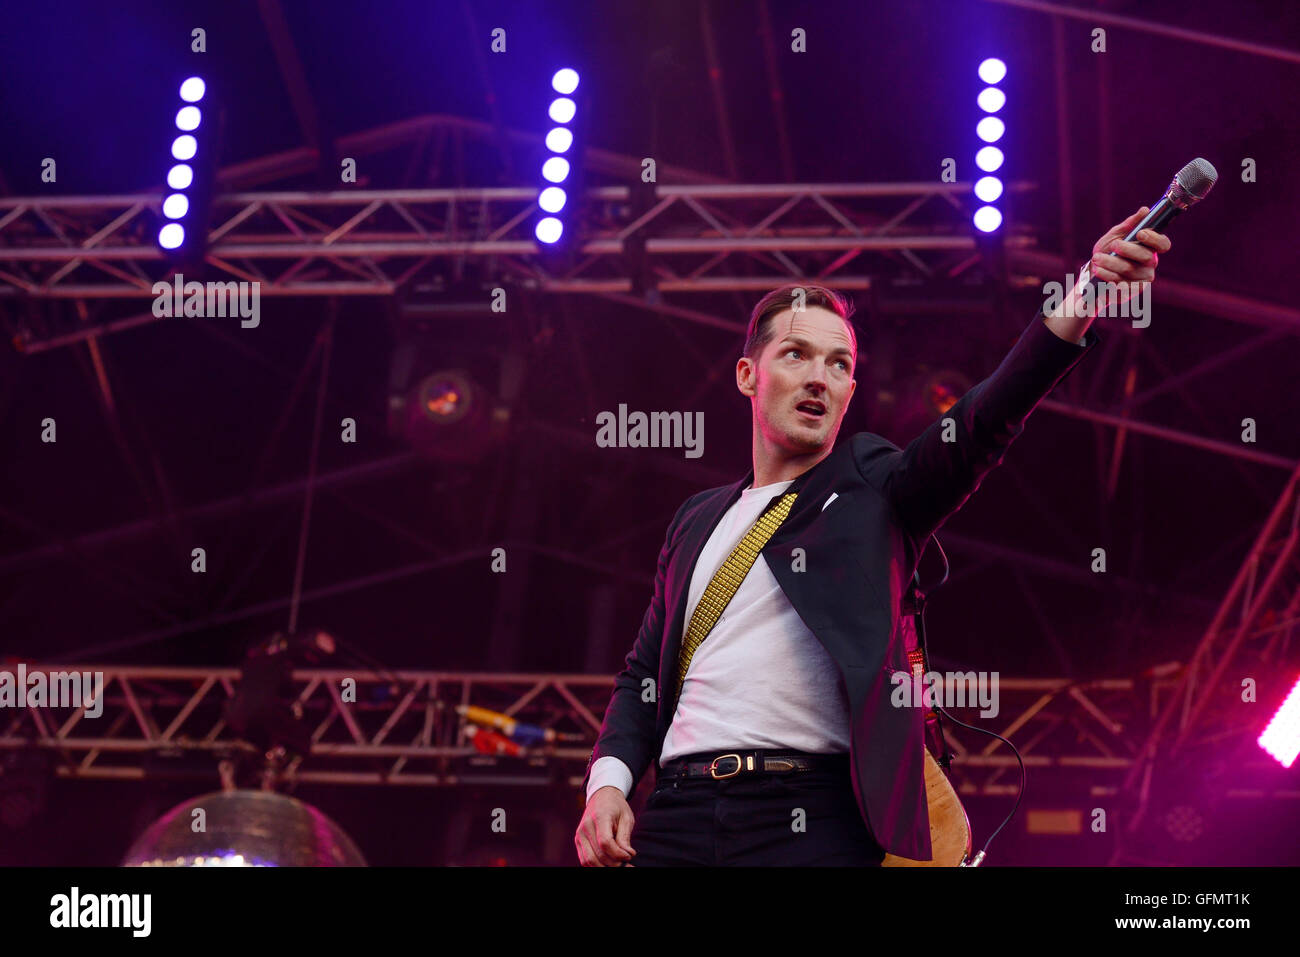 Carfest North, Bolesworth, Cheshire, UK. 31st July 2016. The Feeling performing on the main stage. The event is the brainchild of Chris Evans and features 3 days of cars, music and entertainment with profits being donated to the charity Children in Need. Andrew Paterson/Alamy Live News Stock Photo